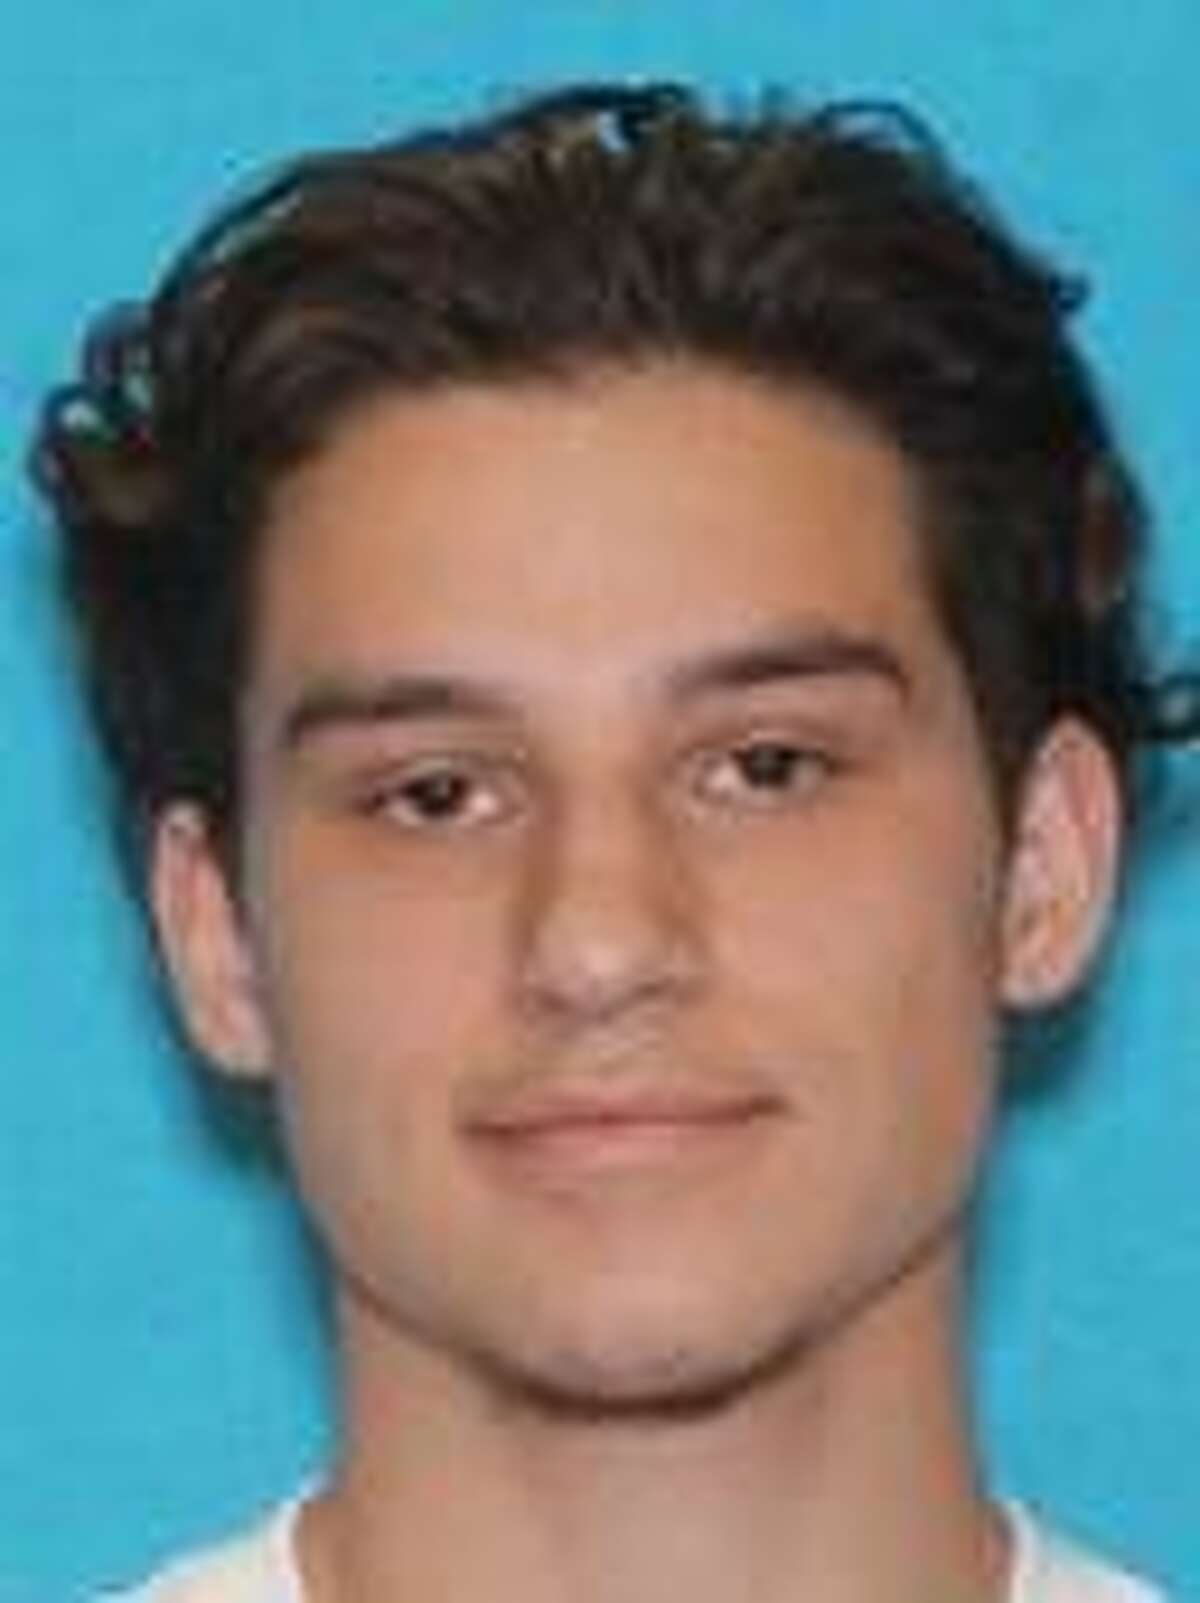 Ethan Beckman has been indicted by a Guadalupe County grand jury in the killing of his childhood friend Jacob Dubois. Police said Beckman was the last person to see Dubois alive. Dubois was reported missing in March 2021, and his remains were found in September 2022.